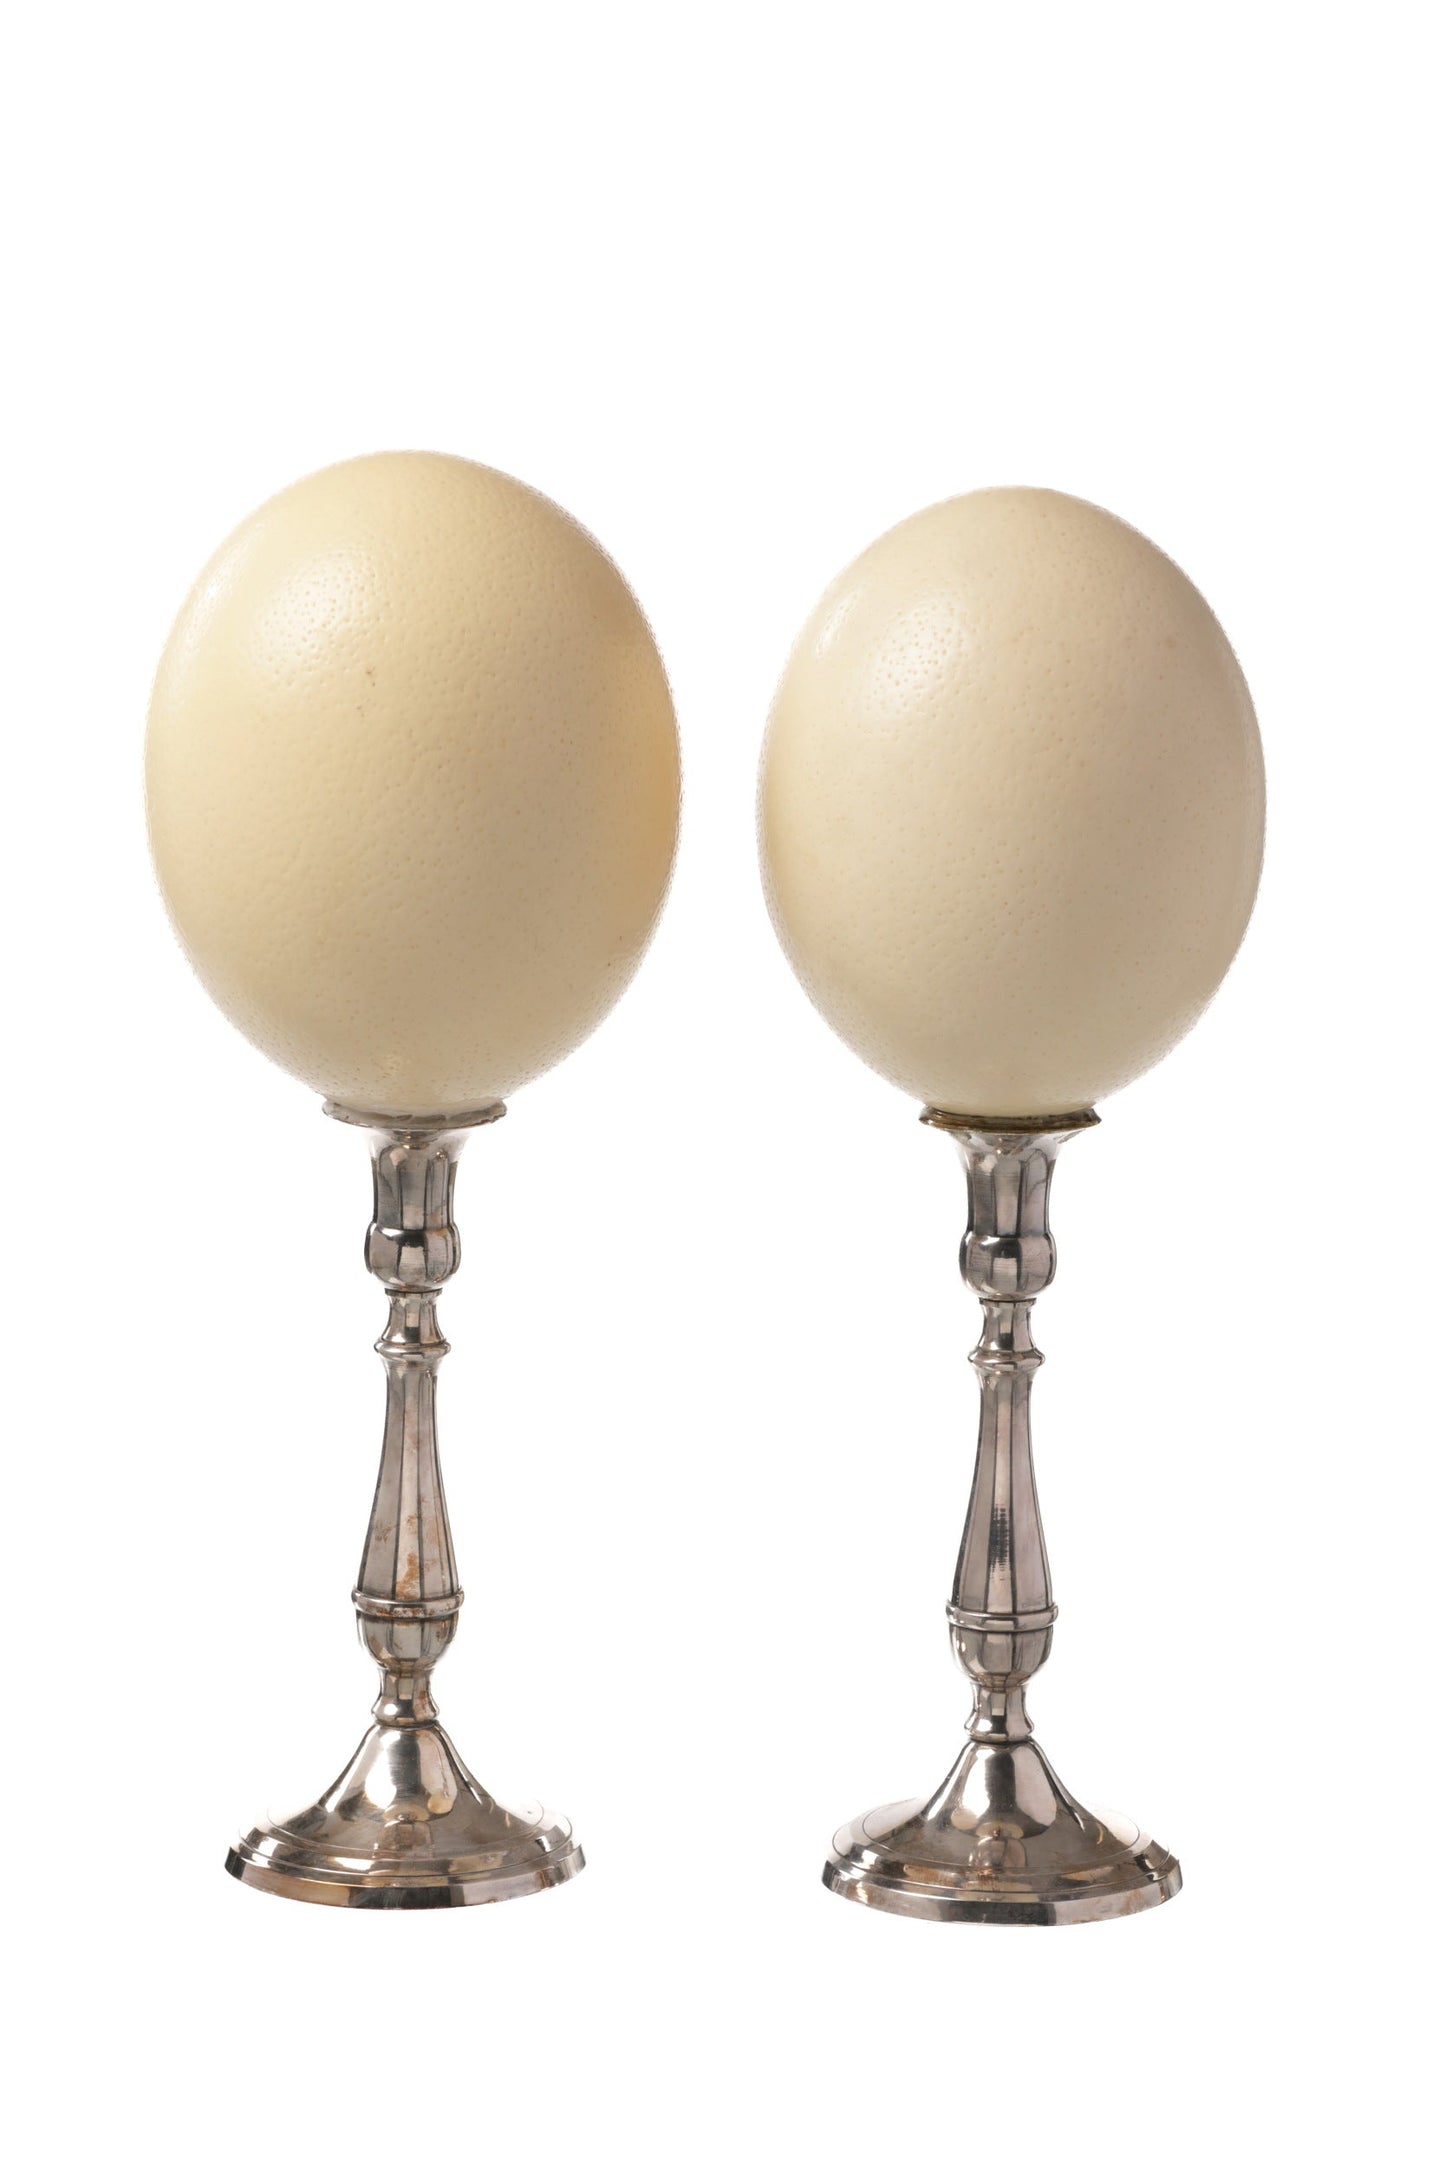 Pair of ostrich eggs from the 1960s